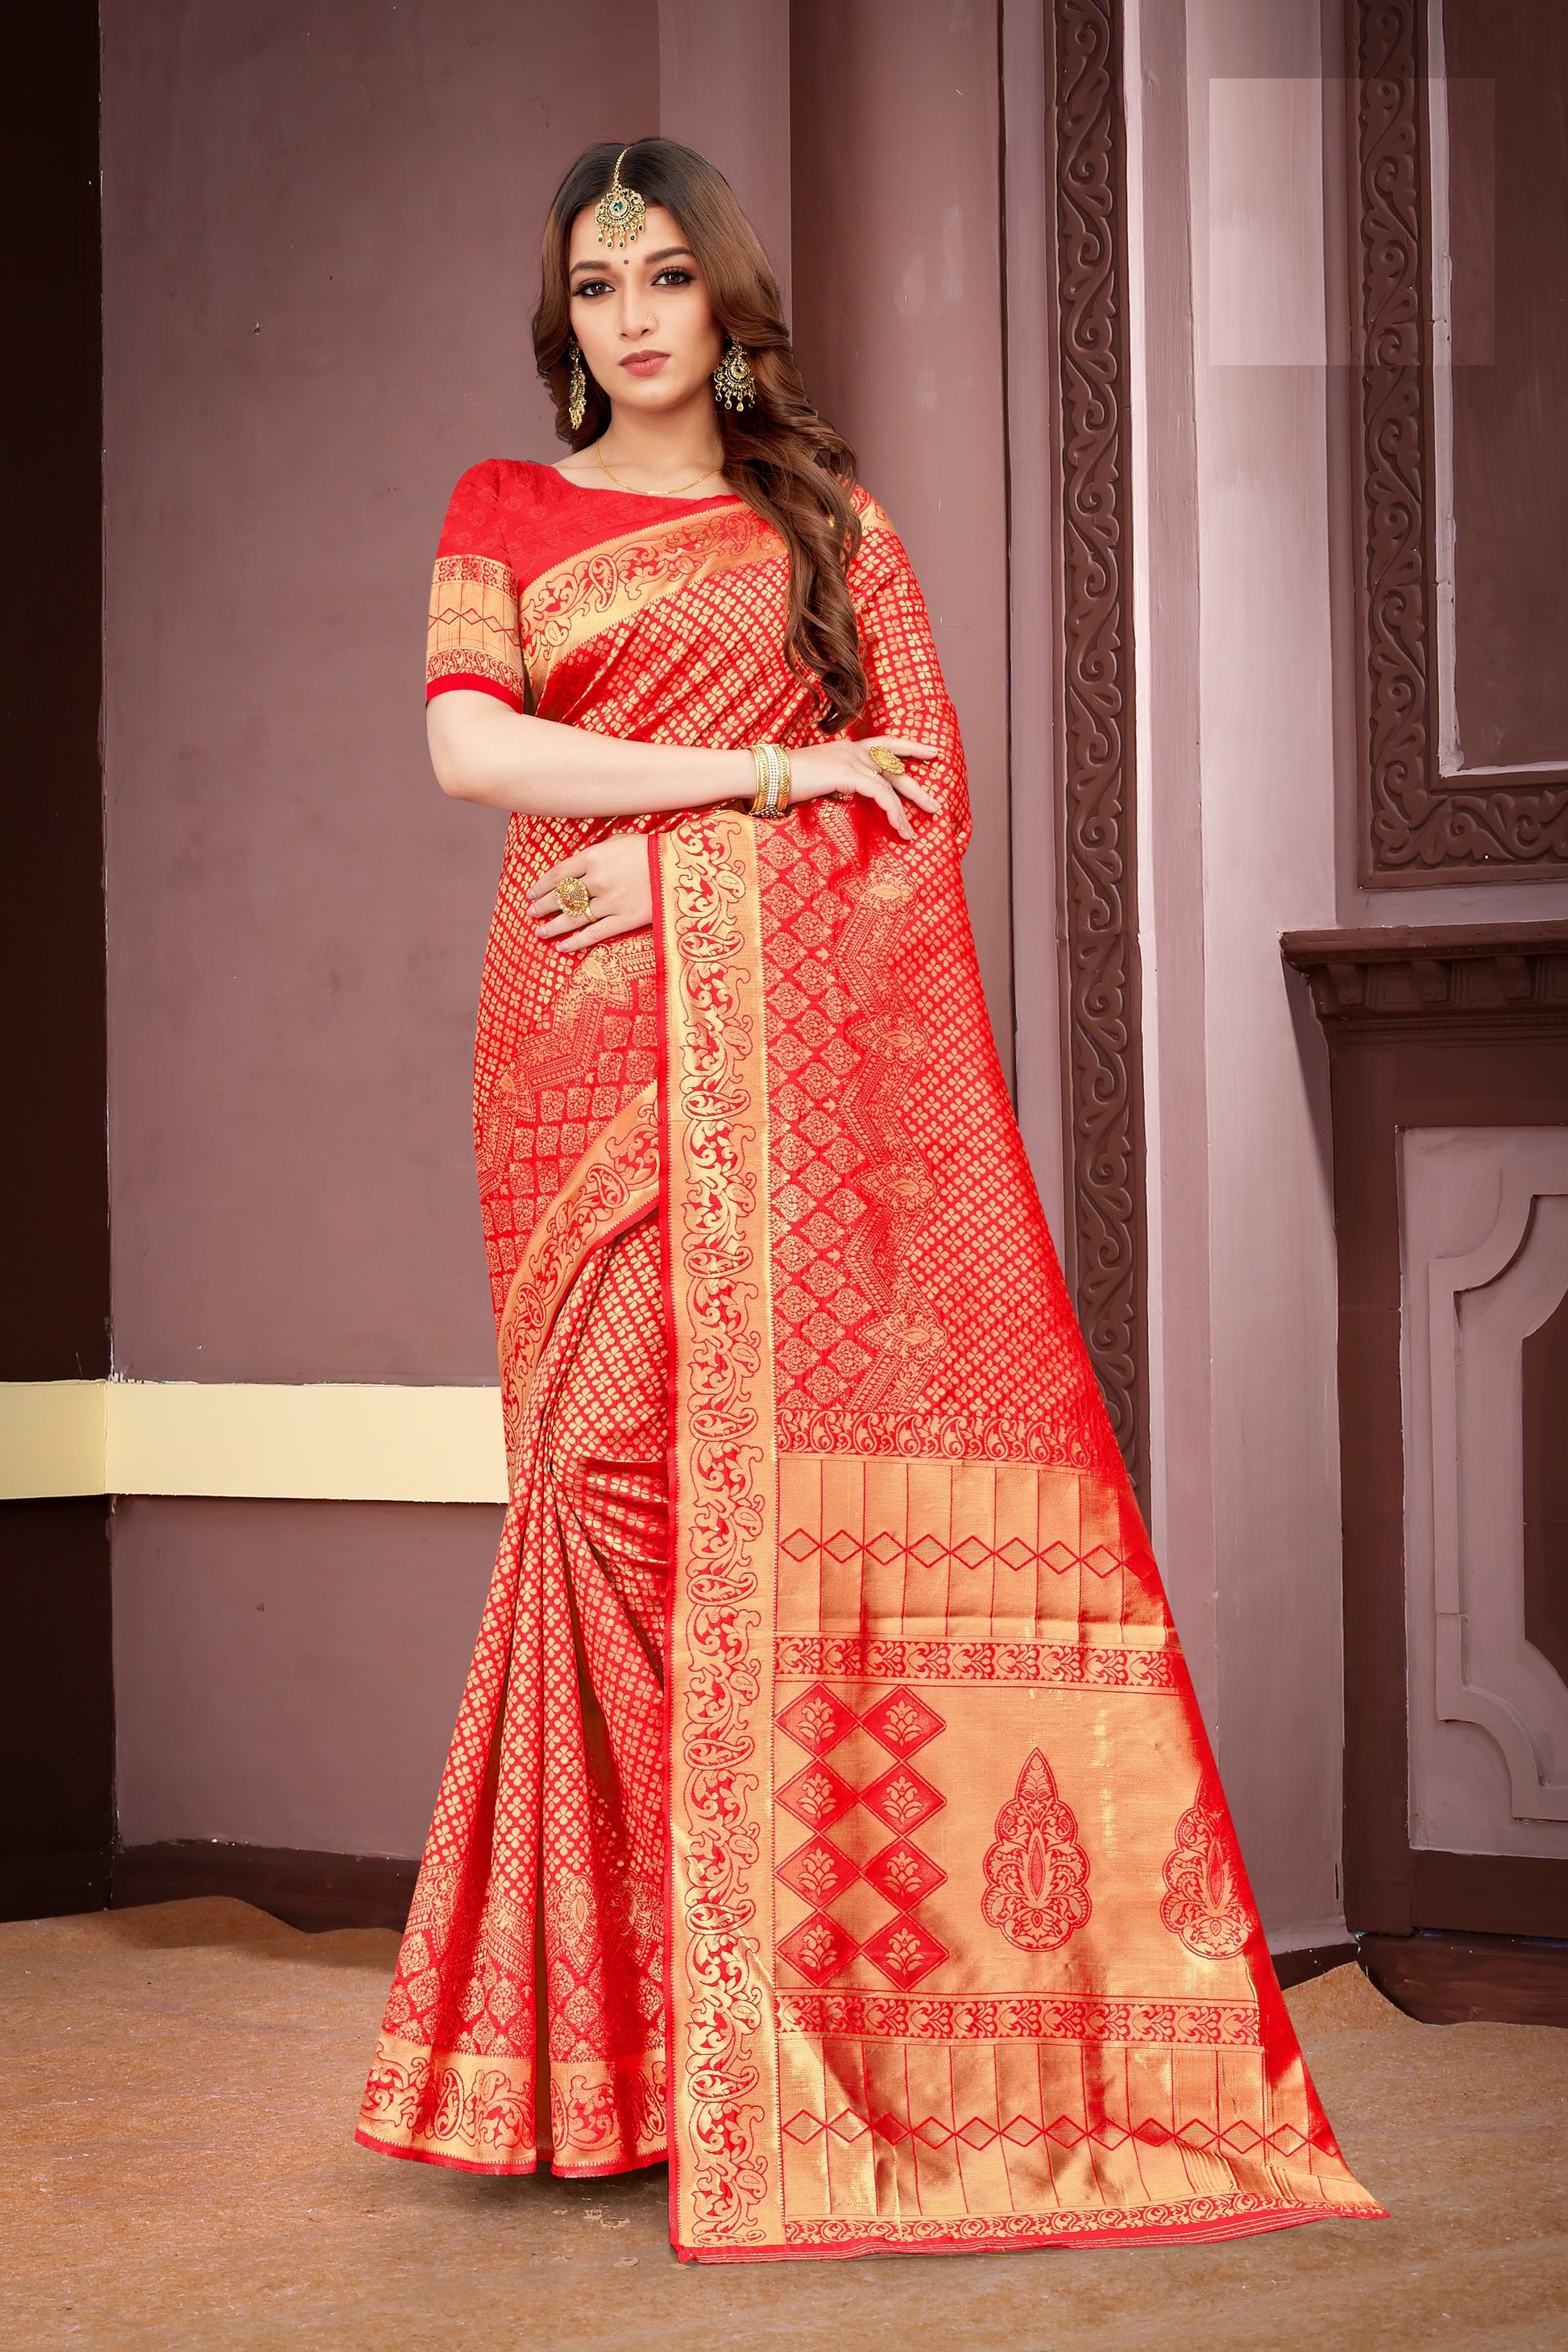  FASHION BOOMS RED BANARSI SILK TRADITIONAL SAREE WITH 7 OTHER COLORS FOR WHOLE FAMILY TO WEAR ON ANY OCCASION .